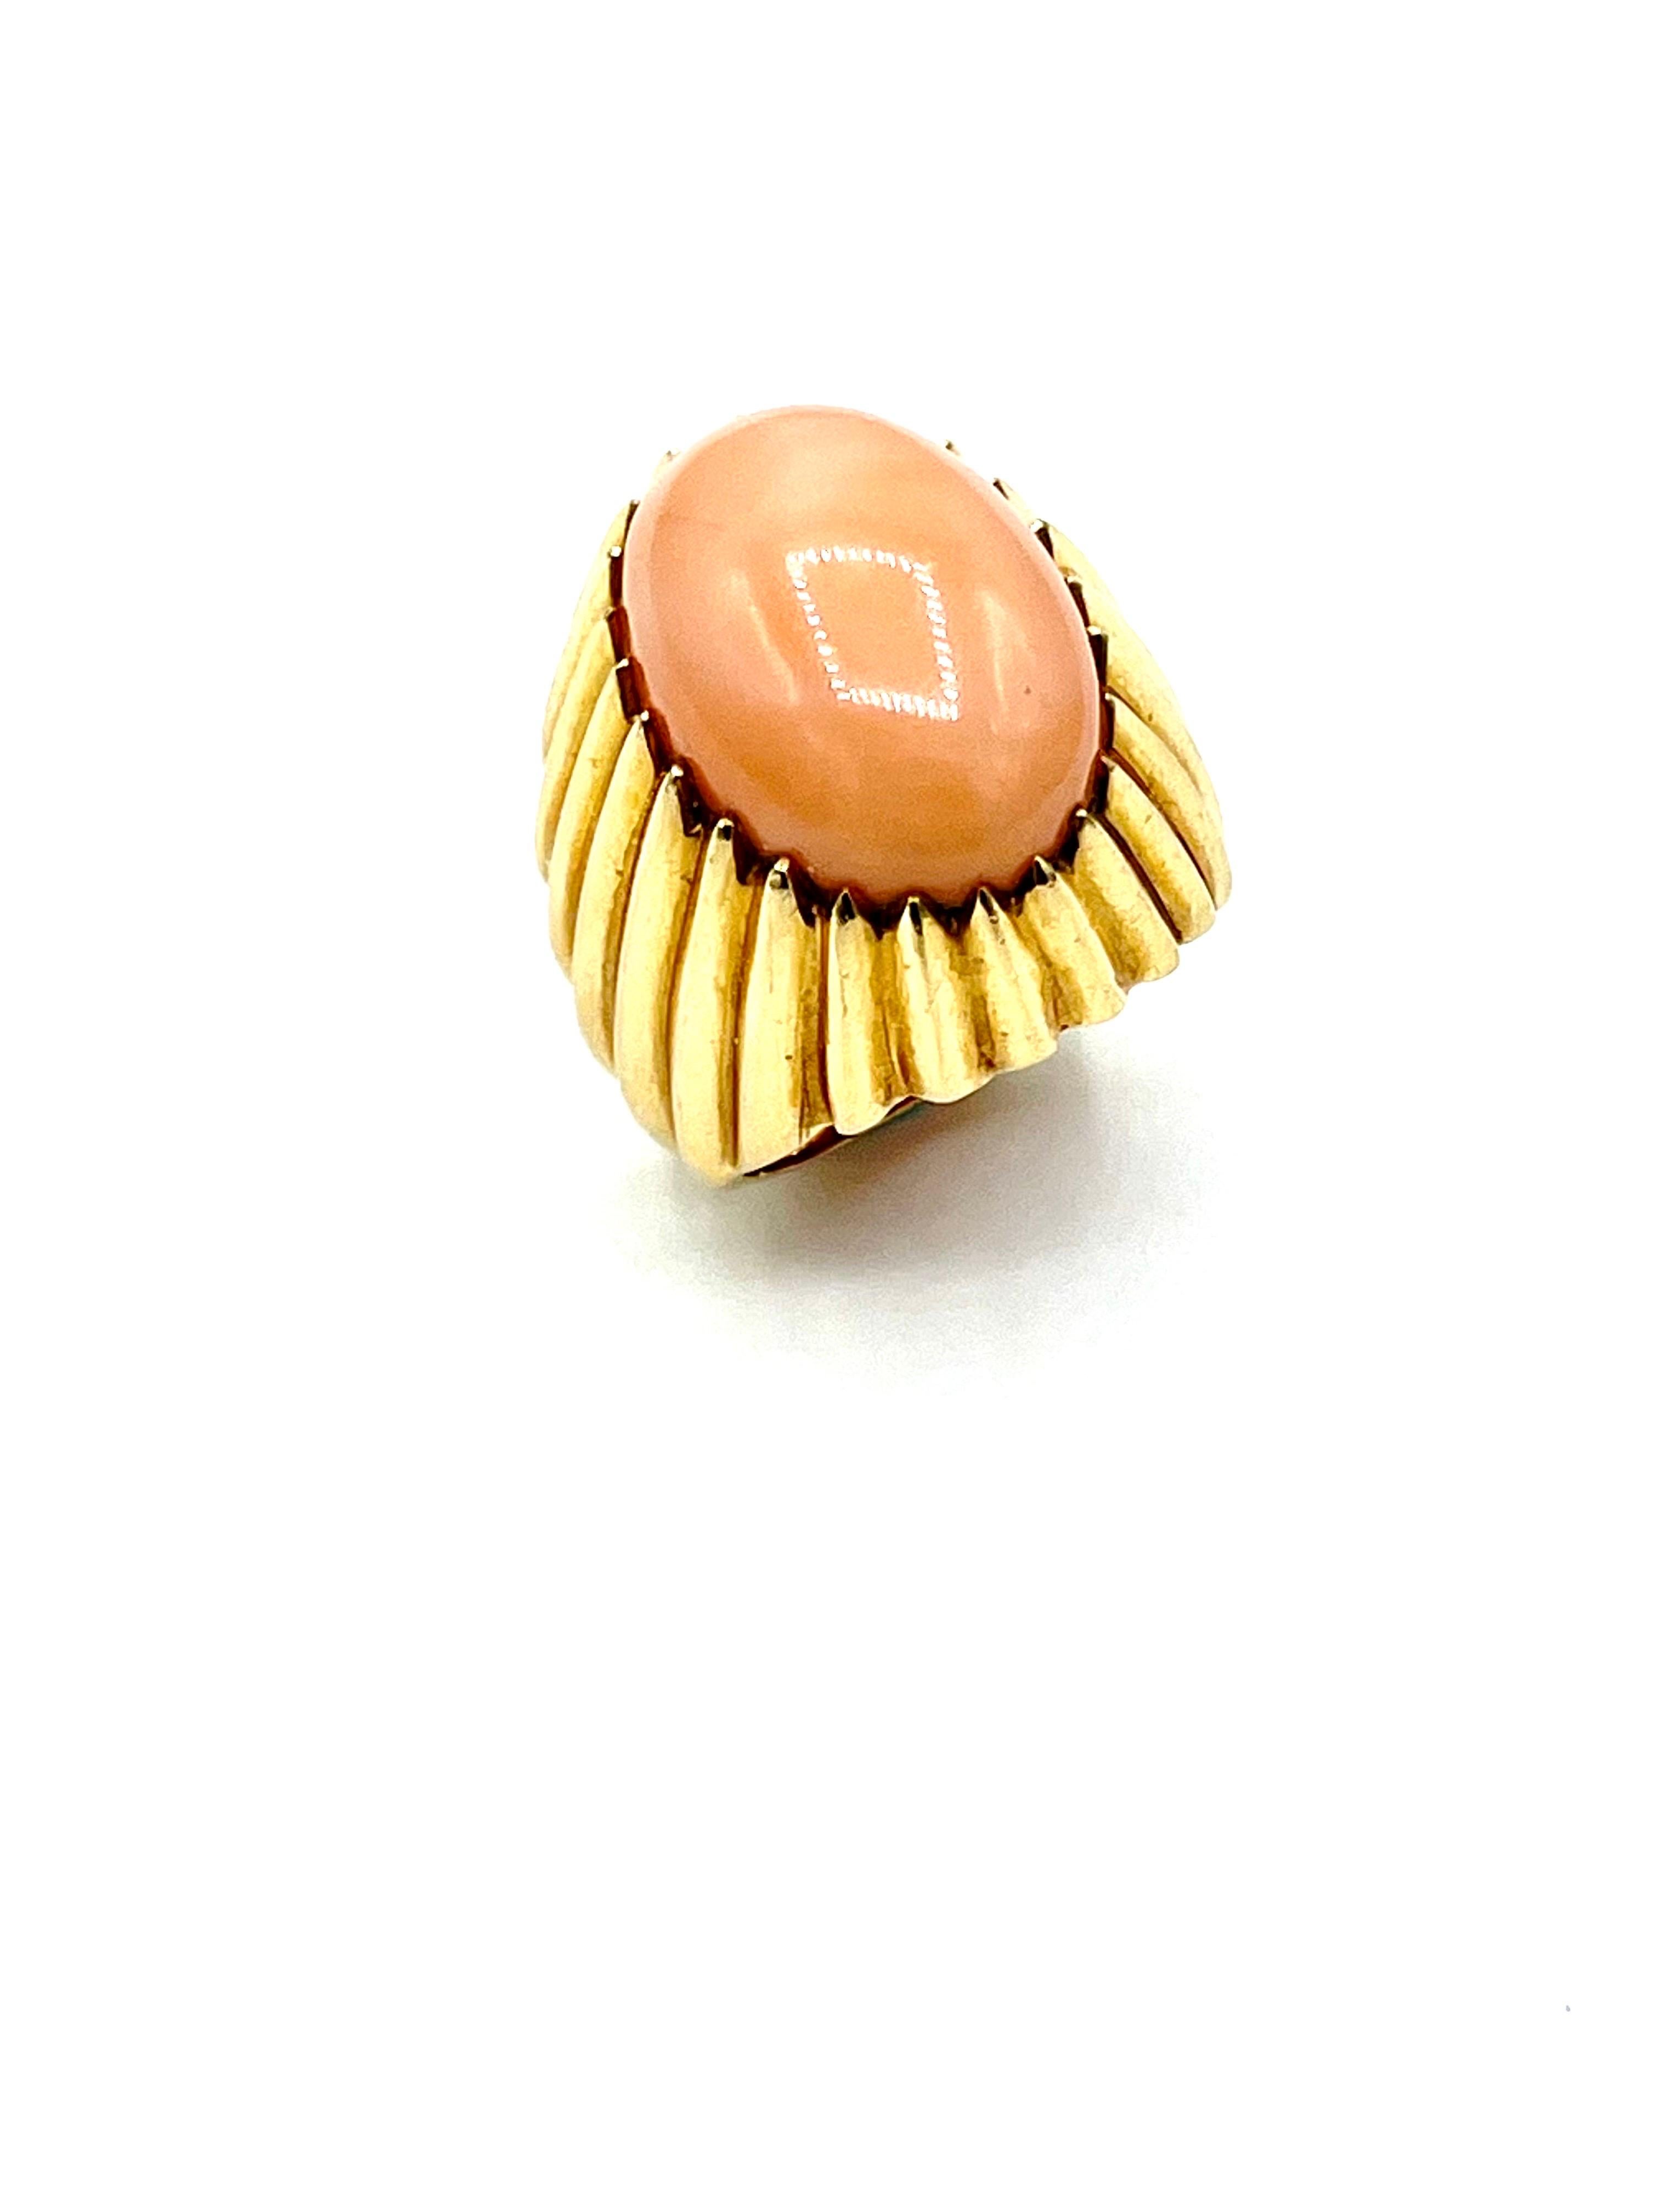 A gorgeous angel skin Coral cocktail ring!  The Coral is bezel set in a high polished bombe' textured gold, with a tapering shank.  The Coral measures 18.10 x 13.20mm.  The ring is made in 14K yellow gold, and is currently a size 6.75, and can be